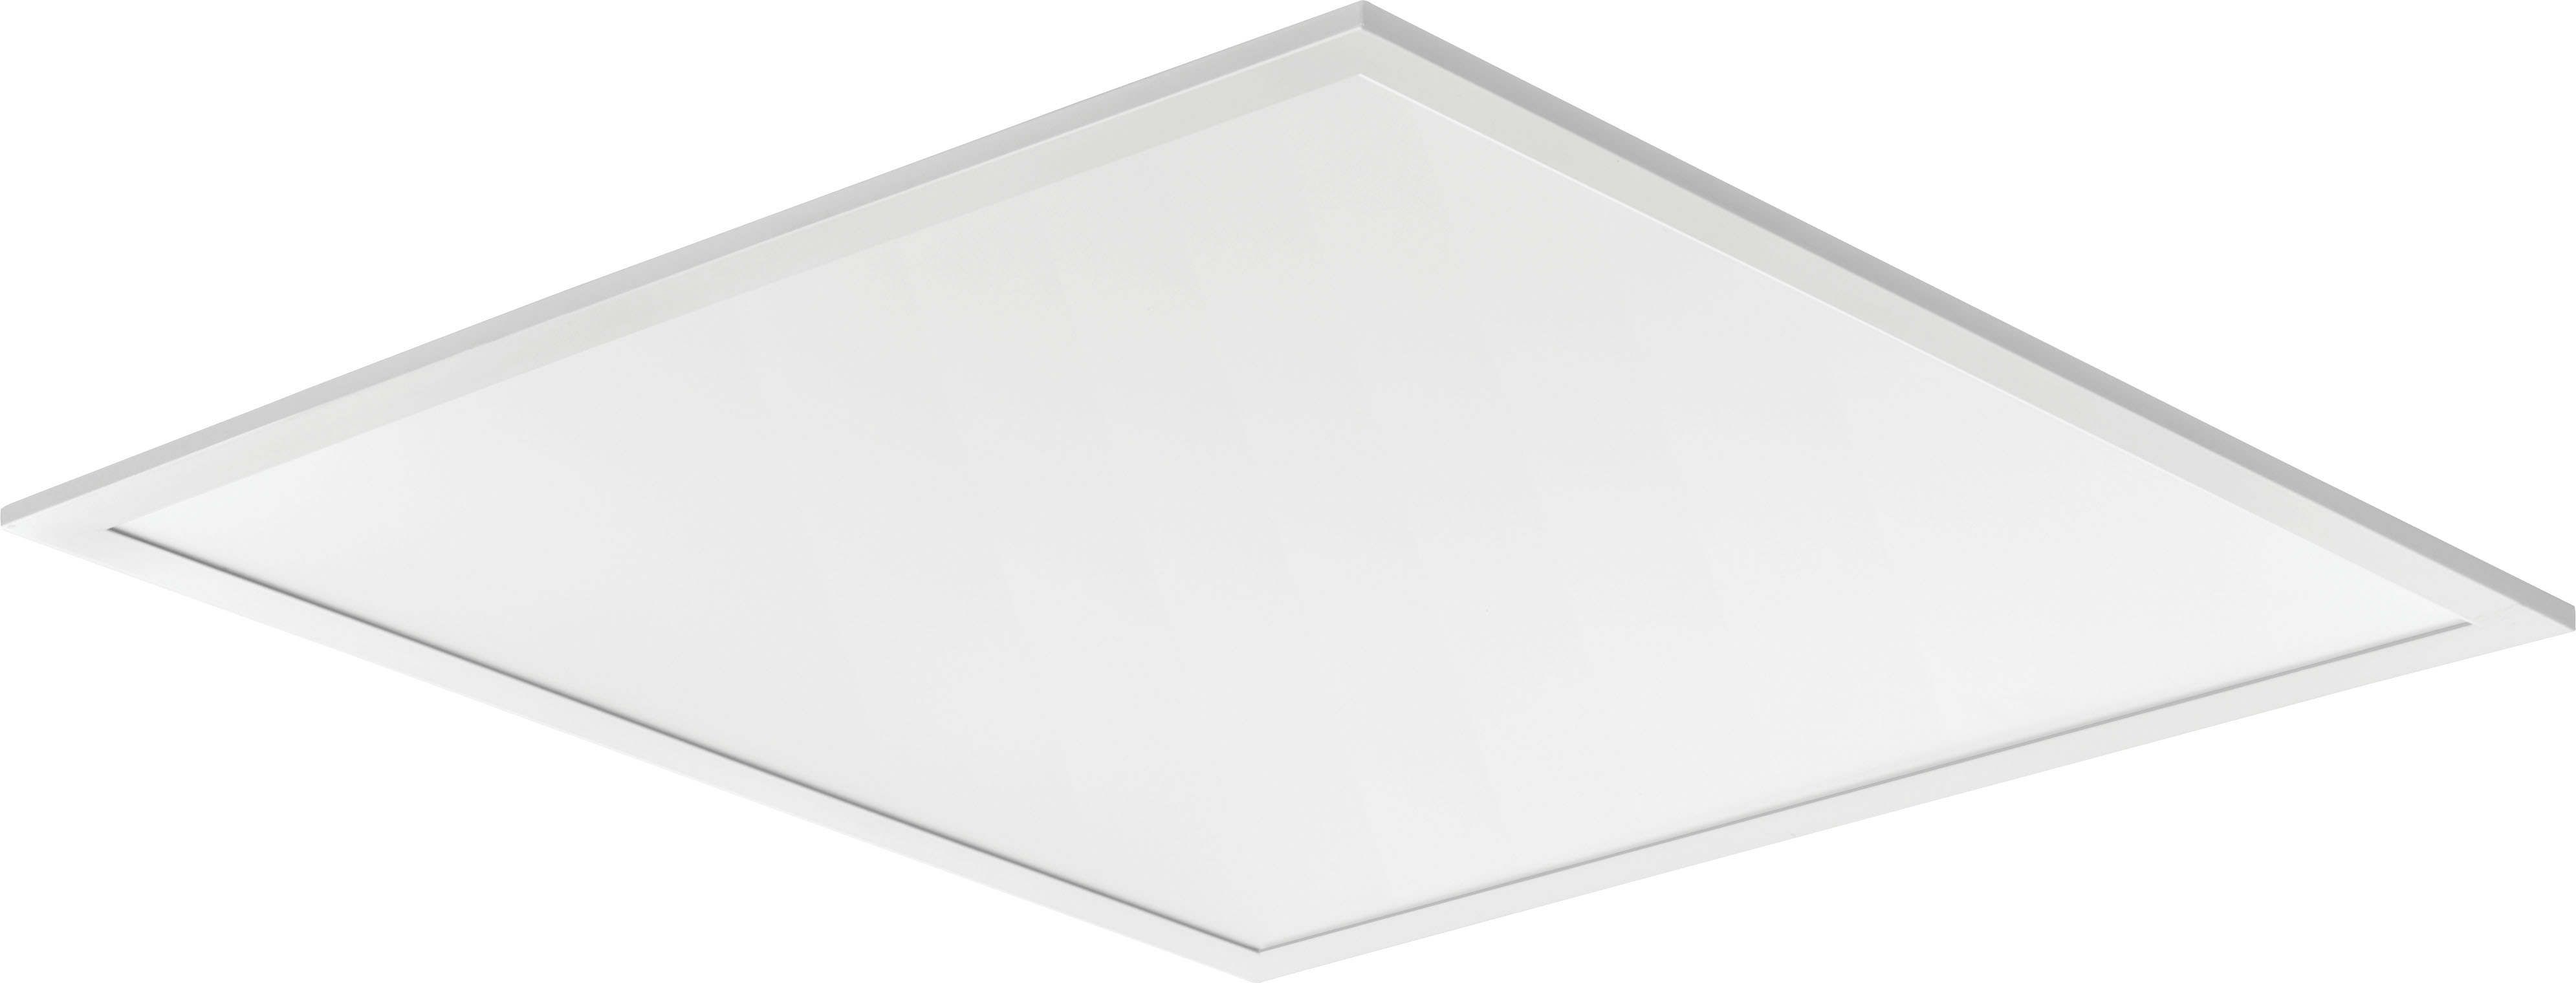 Cpx Led Panel